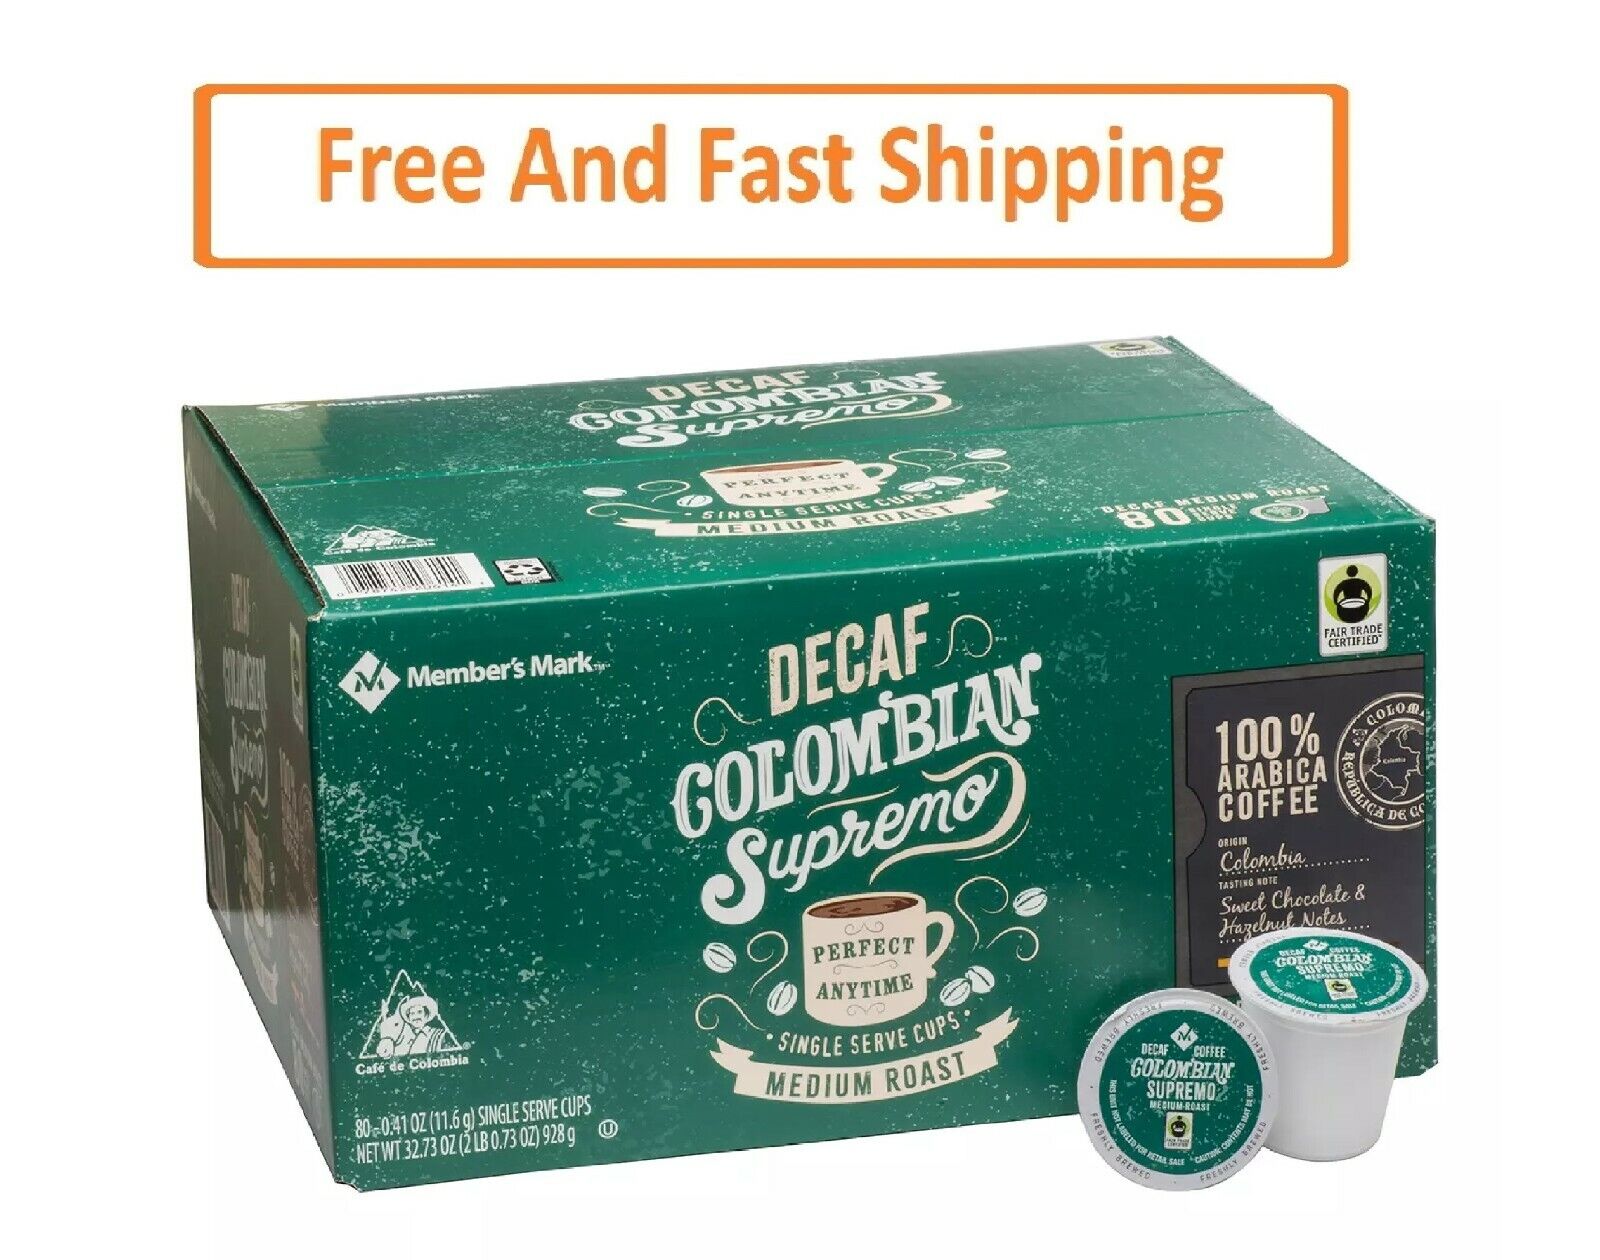 Member's Mark Decaffeinated Colombian Coffee, Single-Serve Cups